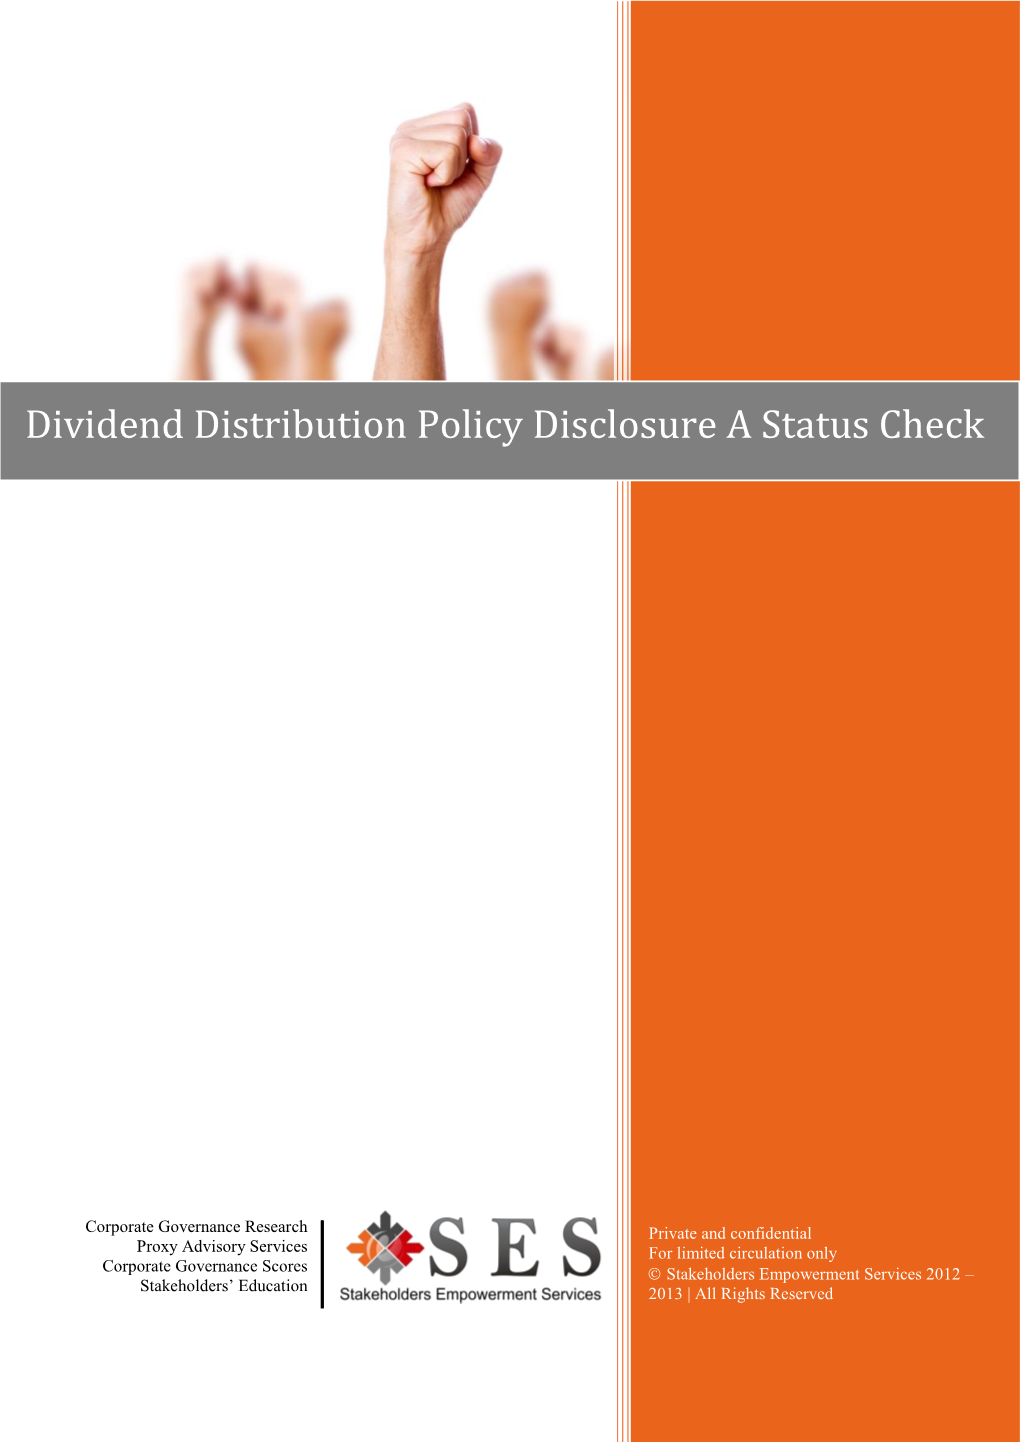 Dividend Distribution Policy Disclosure a Status Check